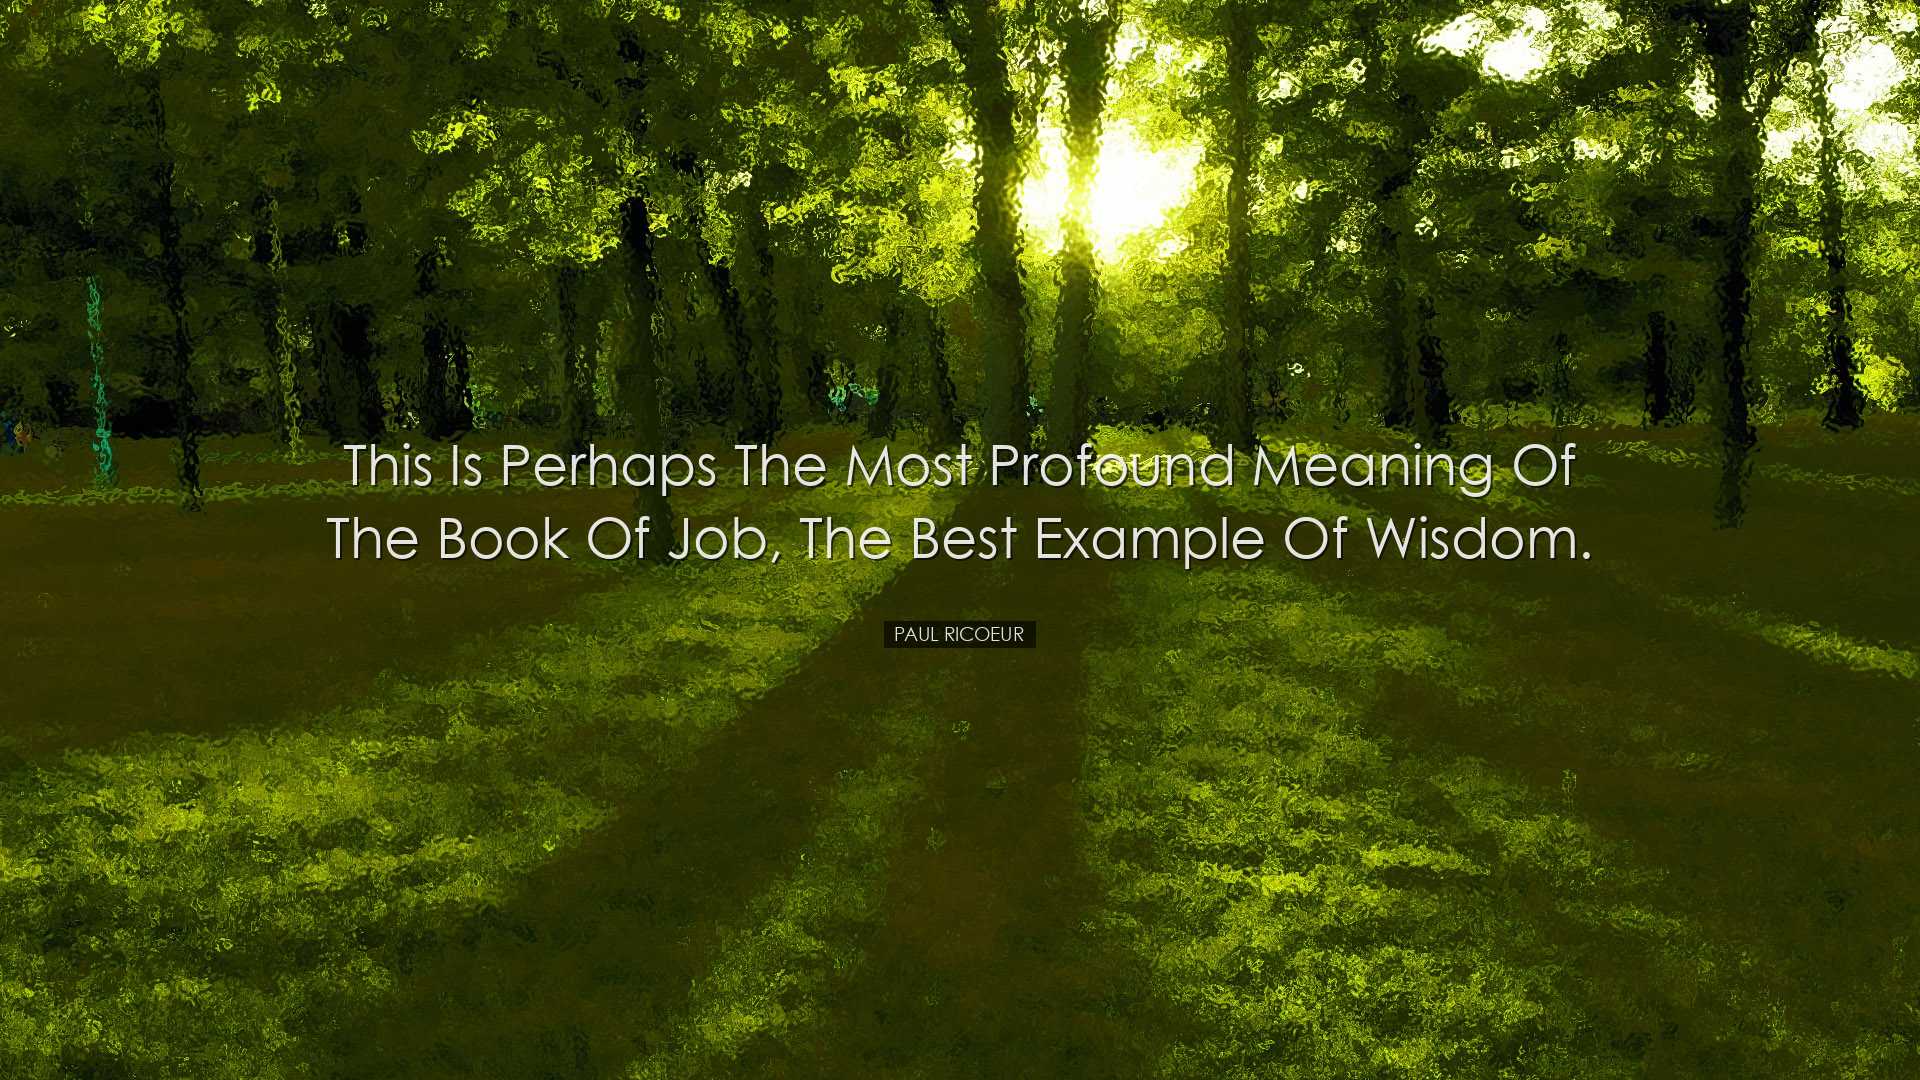 This is perhaps the most profound meaning of the book of Job, the